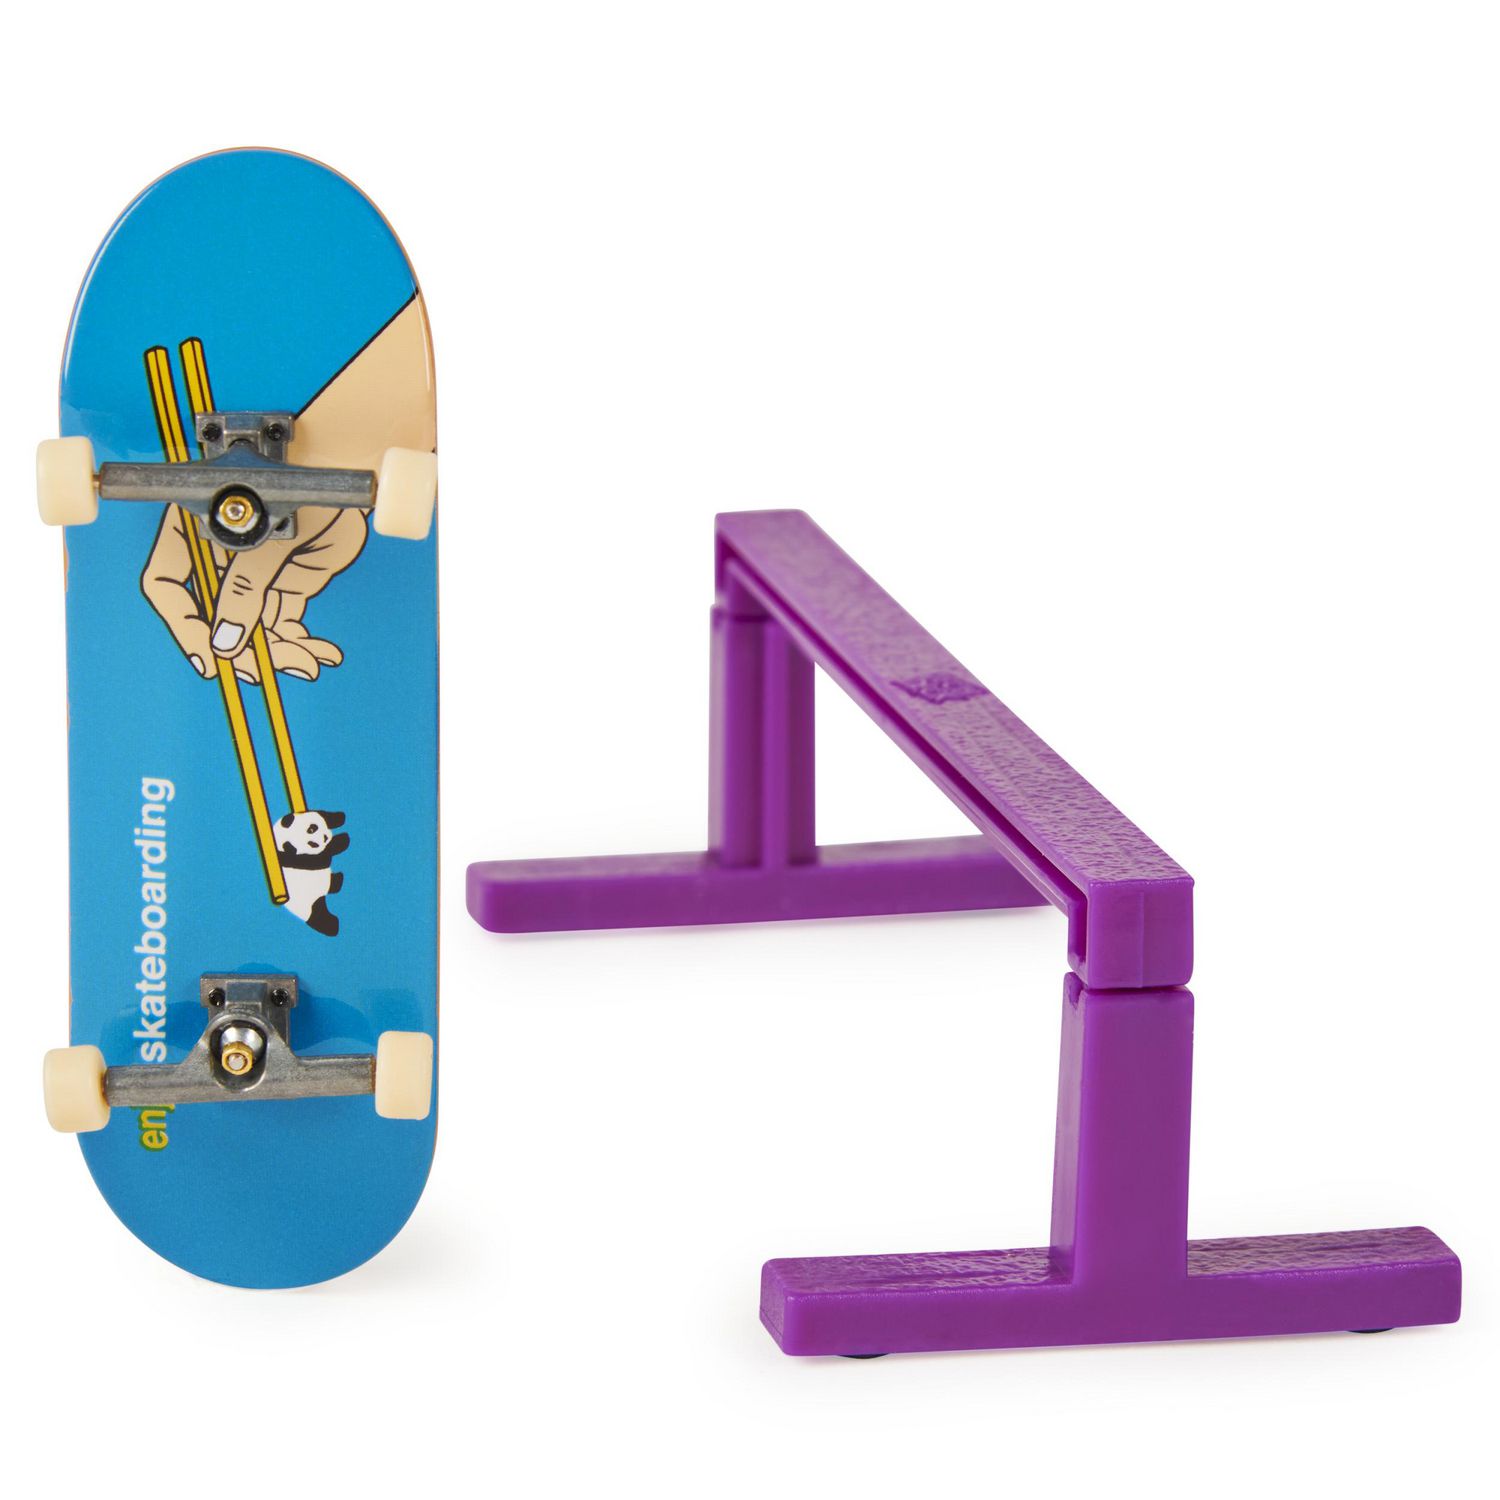 touchgrind skate 2 boards